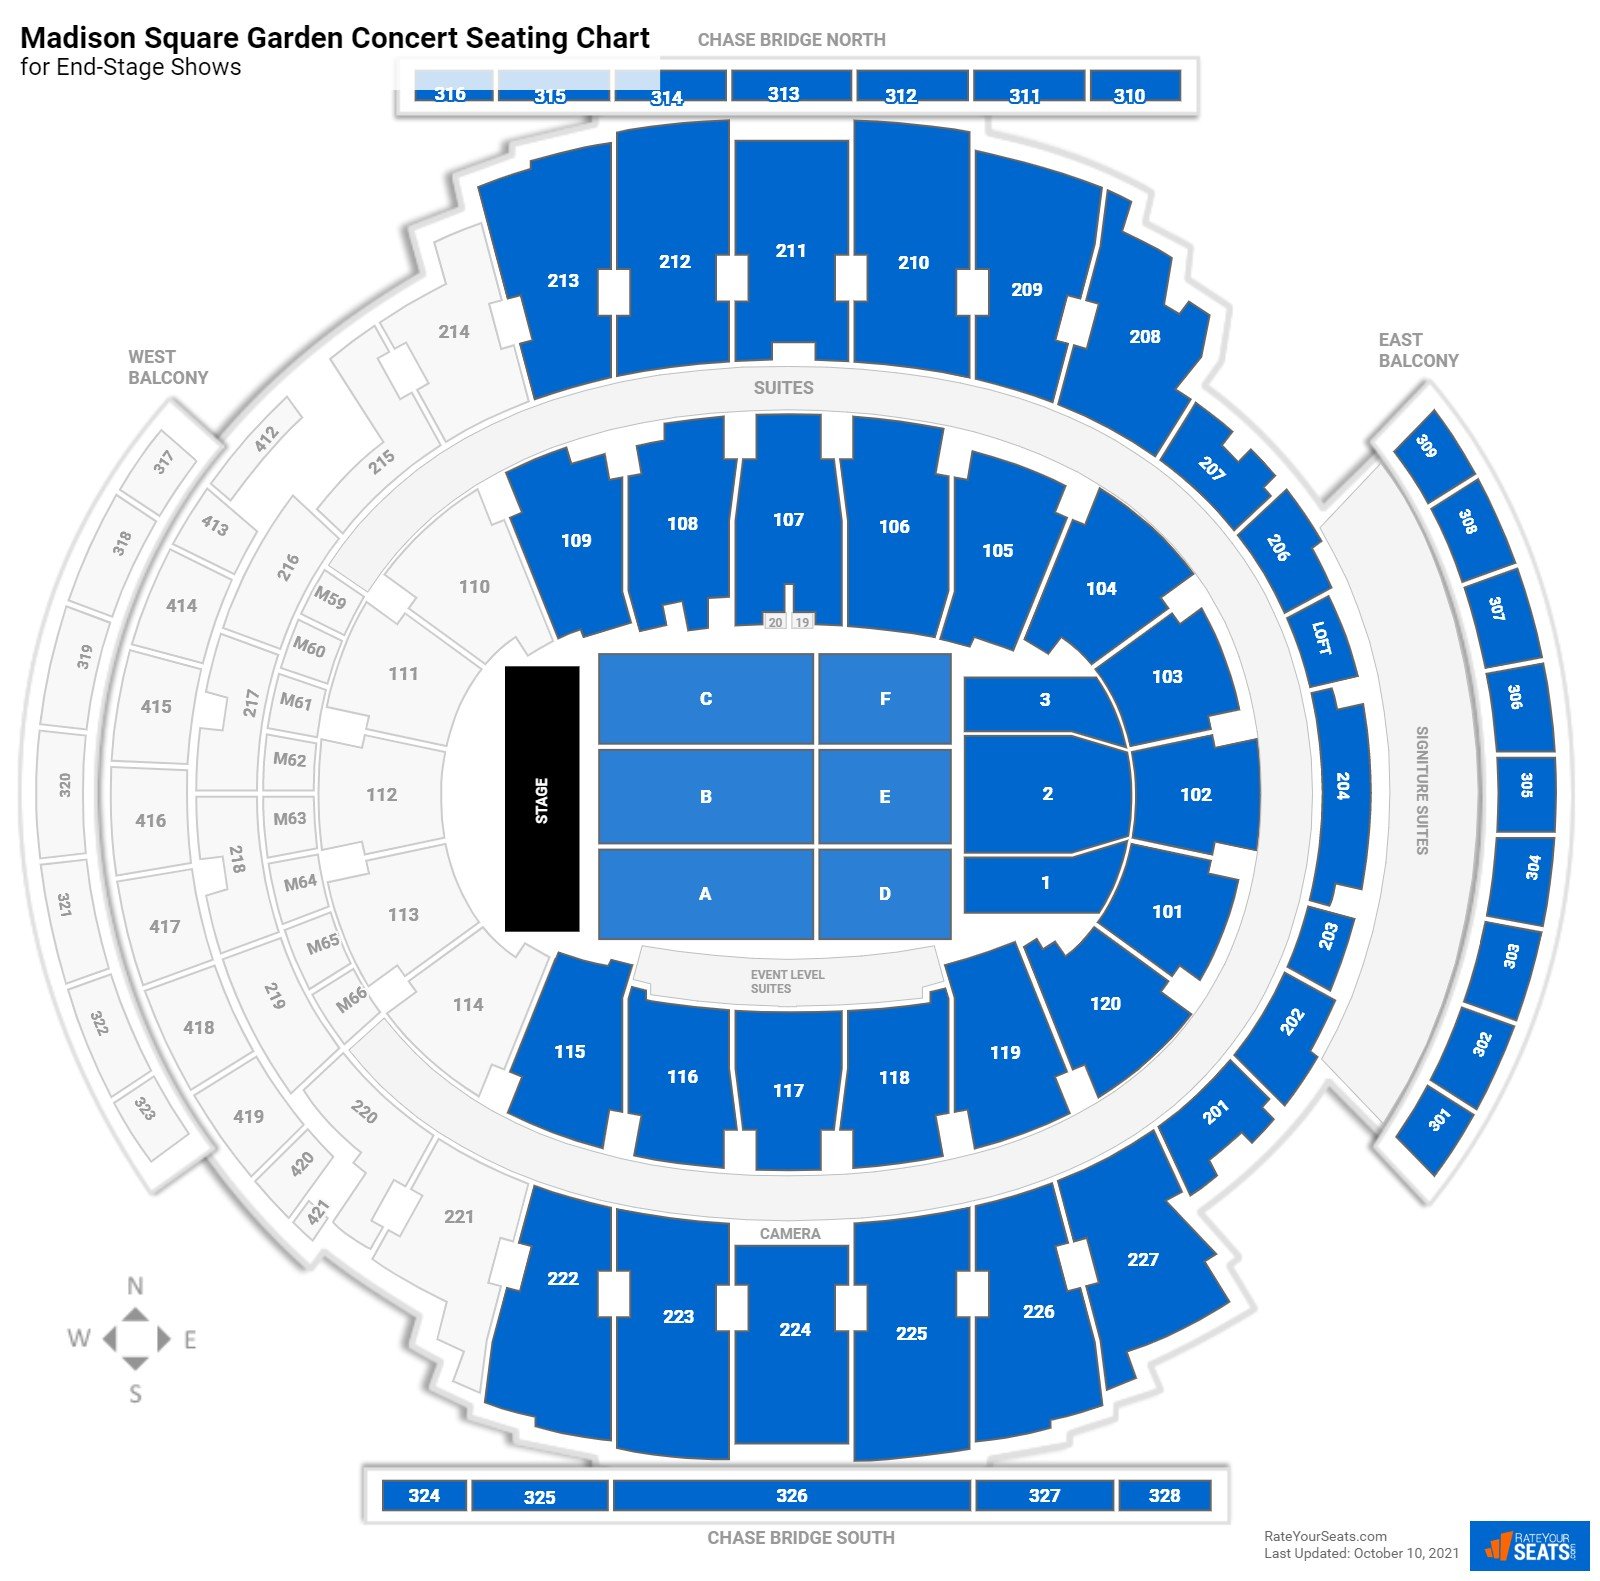 Madison Square Garden Concert Seating Chart